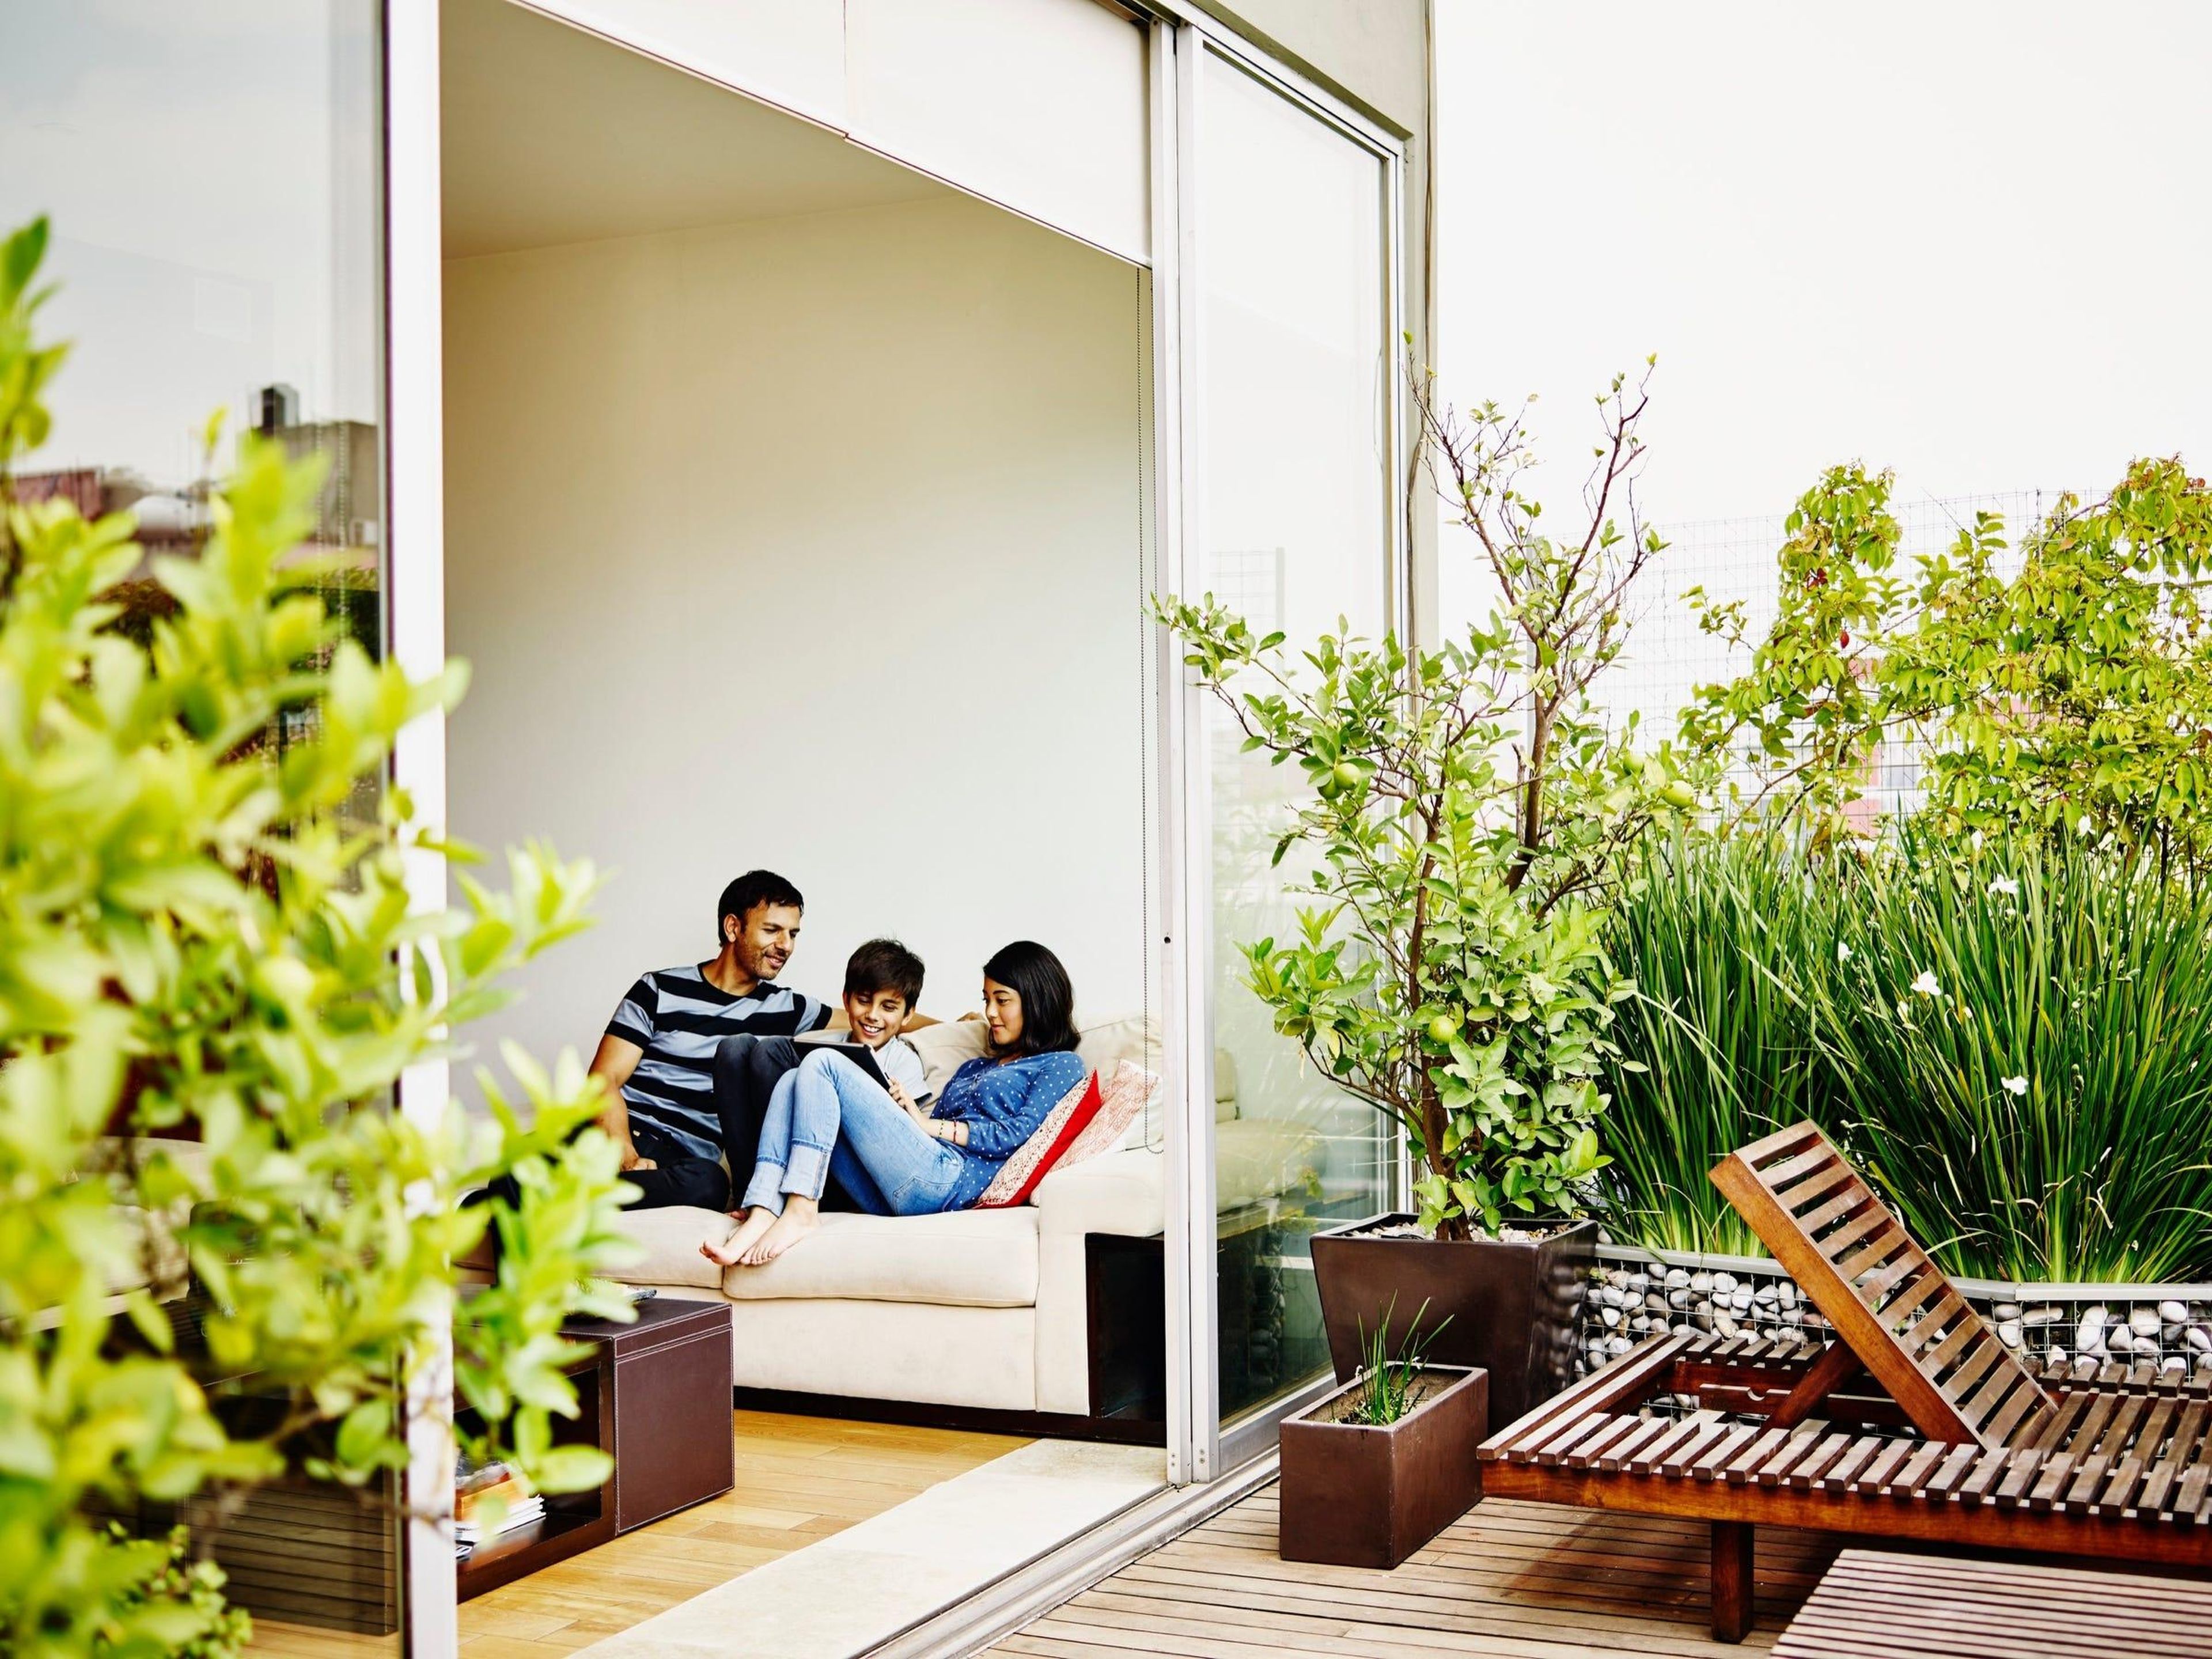 Outdoor space will likely become an even more coveted amenity.